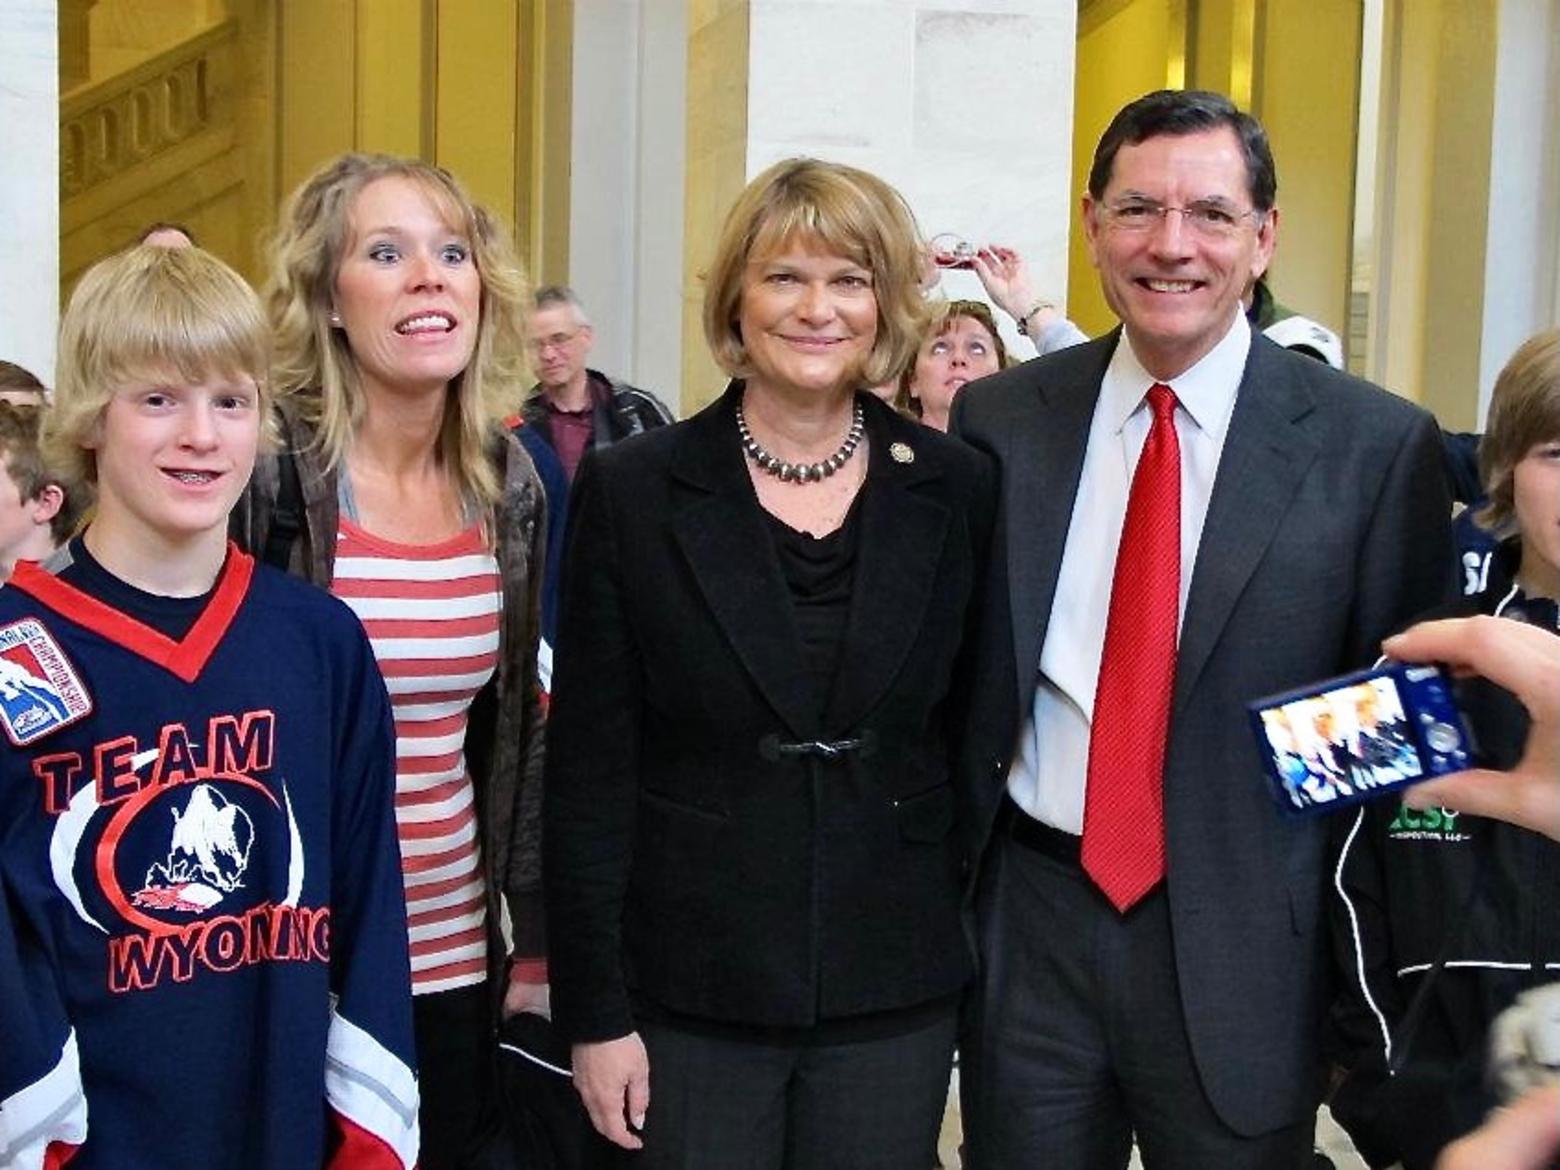 Top: Trump and Lummis. Just above: U.S. Sens. from Wyoming Cynthia Lummis and John Barrasso—two-thirds of Woming's Congressional Delegation,  pose with constituents at a meet and greet in Washington D.C.  The looming question is: Will Lummis and Barrasso back incumbent Cheney in next year's GOP primary for Wyoming's lone Congressional seat or will they side with Harriet Hageman, endorsed by Trump who is irate with Cheney for saying the catalyst for the unprecedented Jan. 6 insurrection at the US Capitol needs to be investigated.